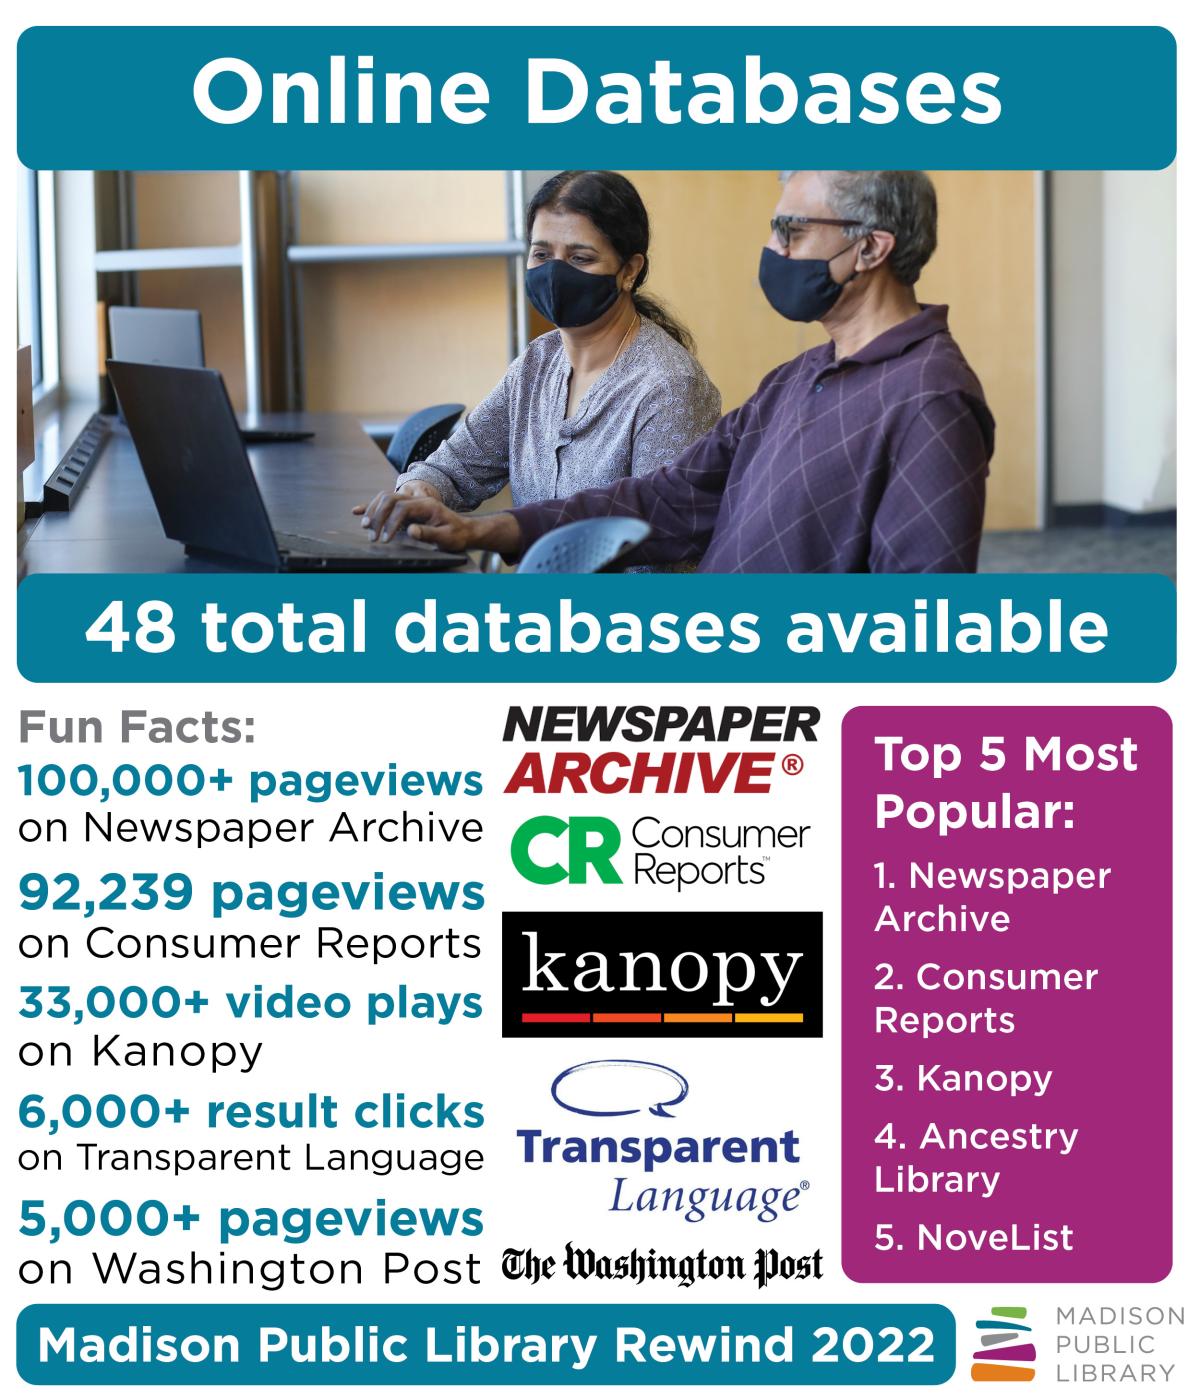 Madison Public Library has 48 online databases to choose from